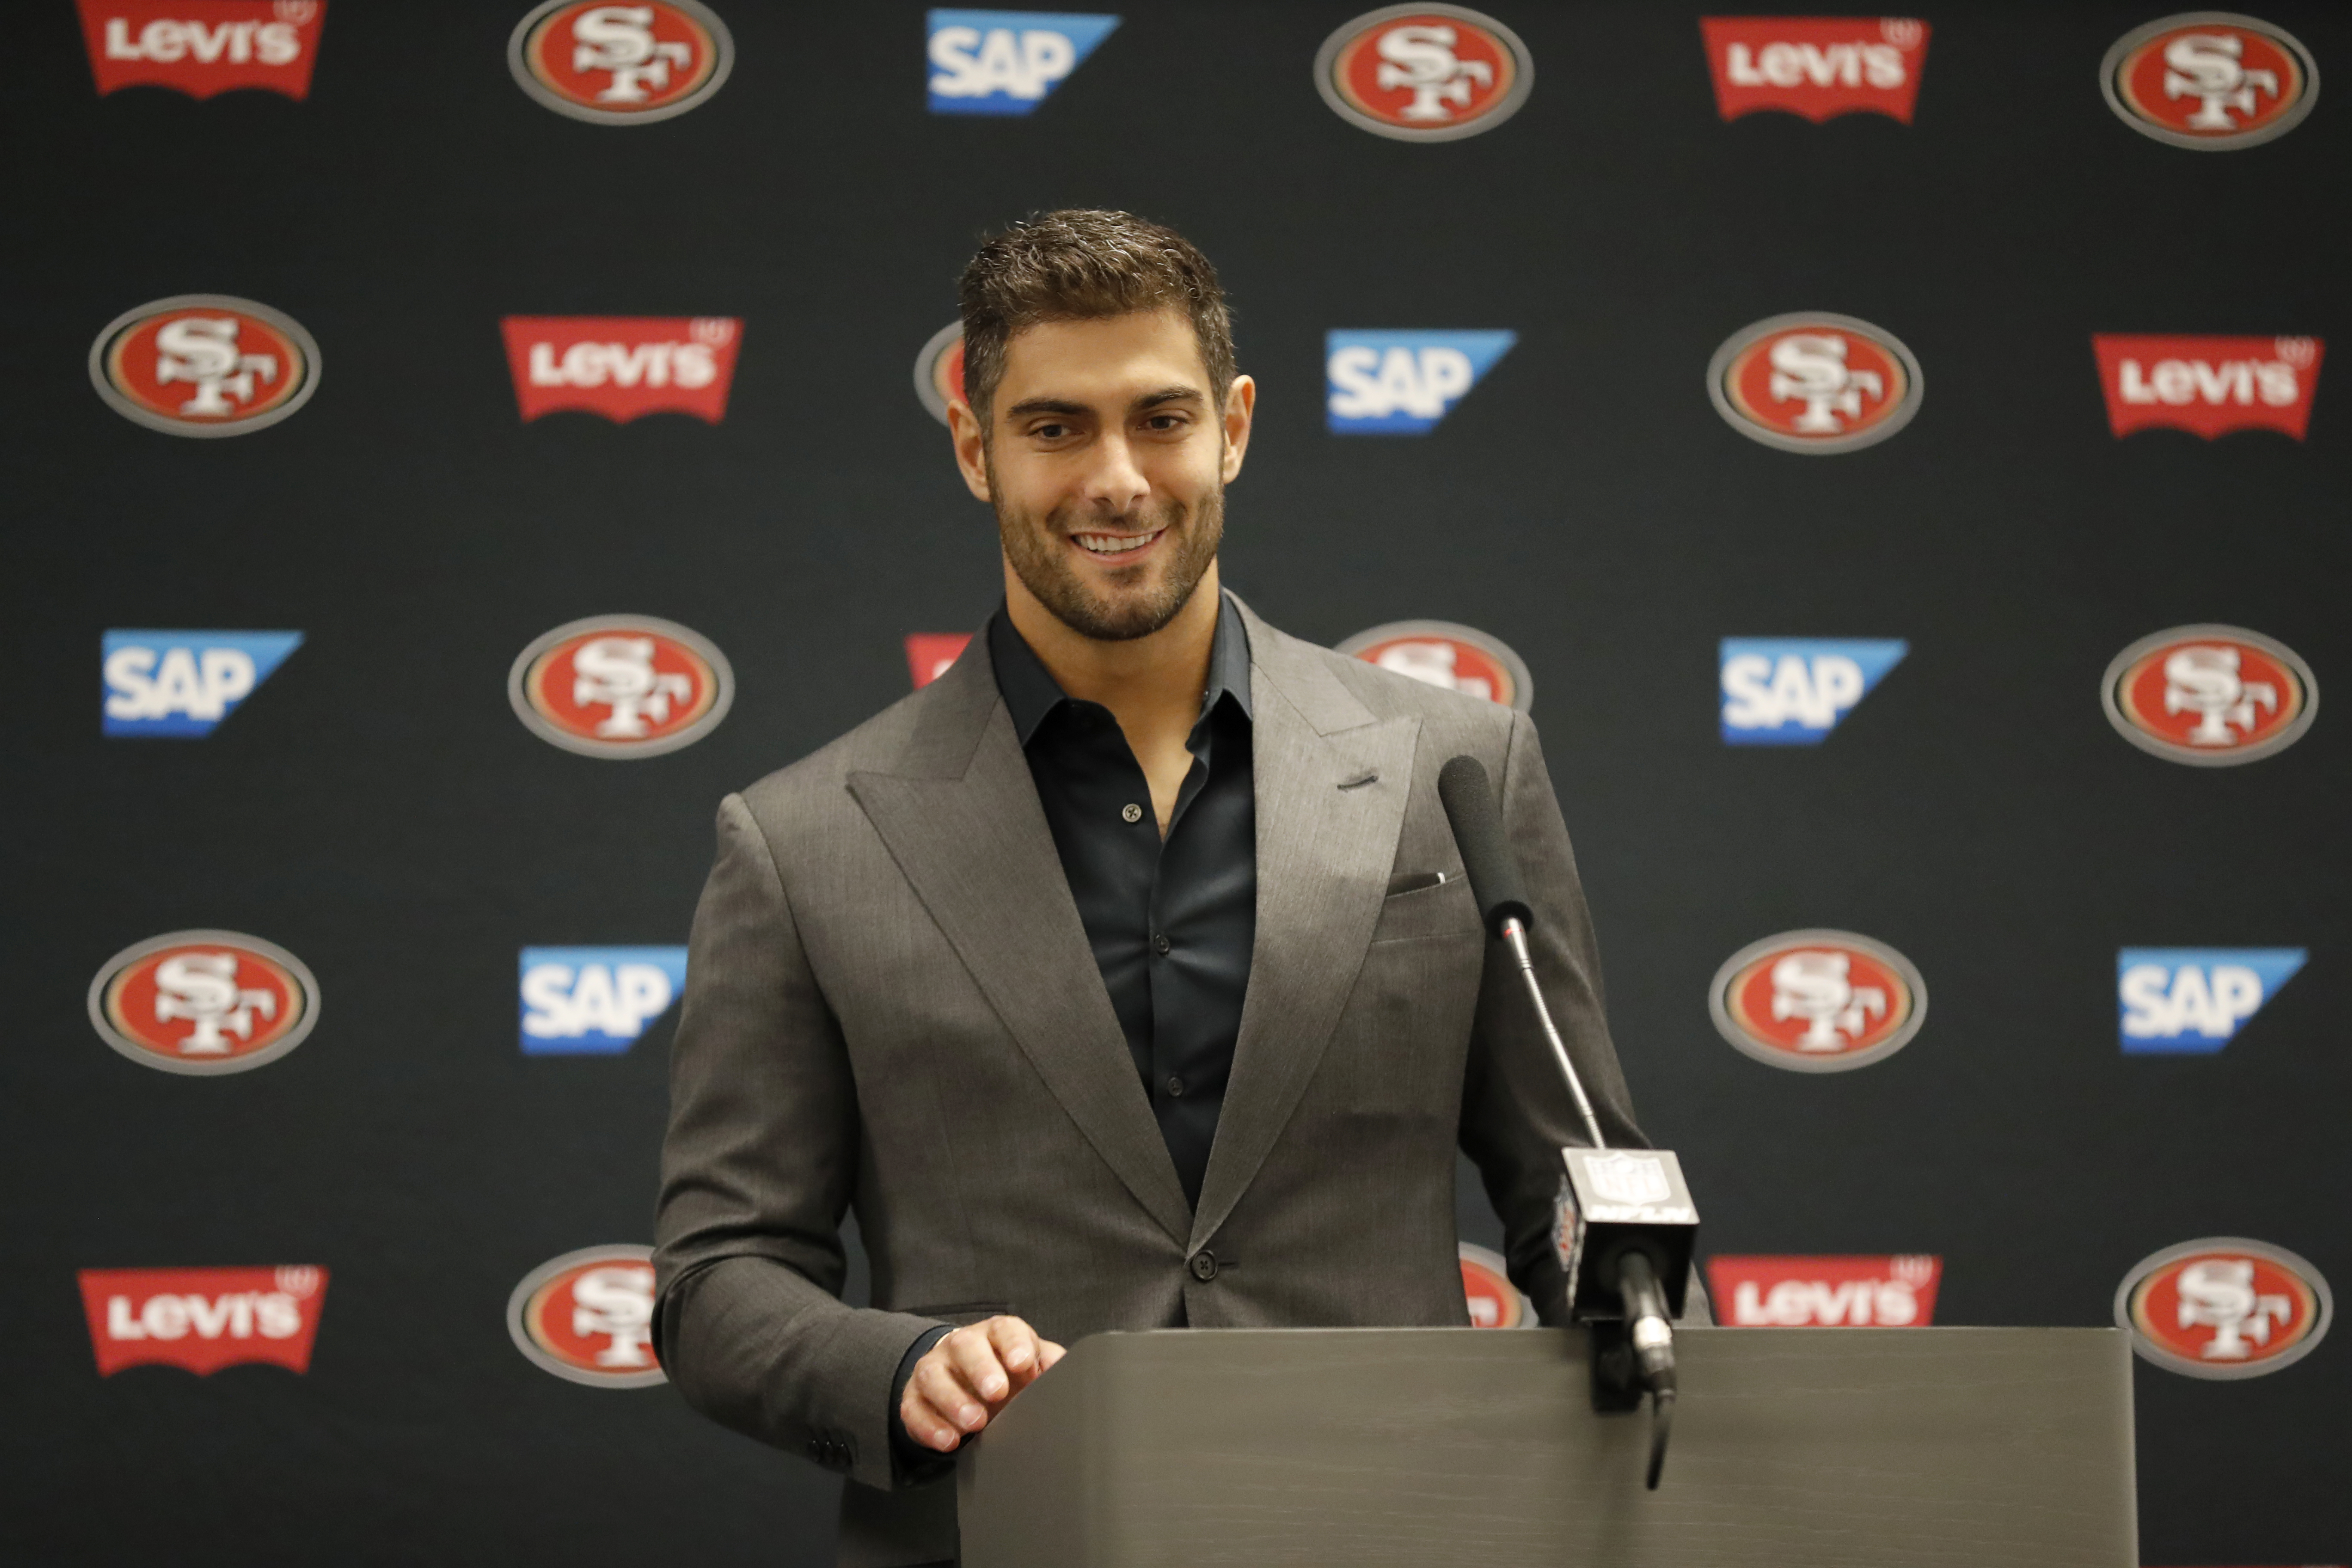 49ers' Jimmy Garoppolo on Trade Rumors, Criticism: 'Keep It Coming. It Fuels Me'